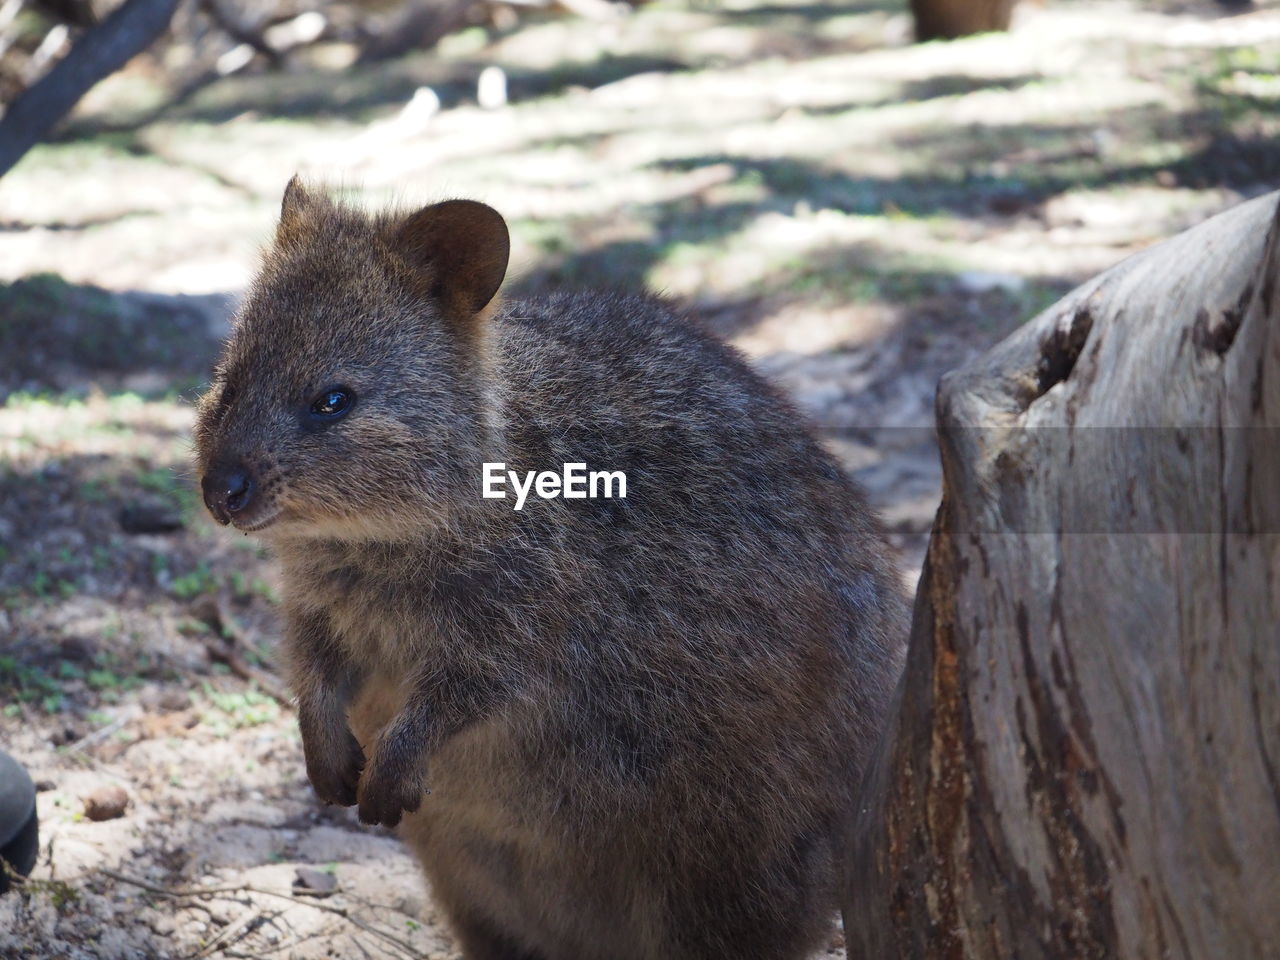 Close-up of quokka on field